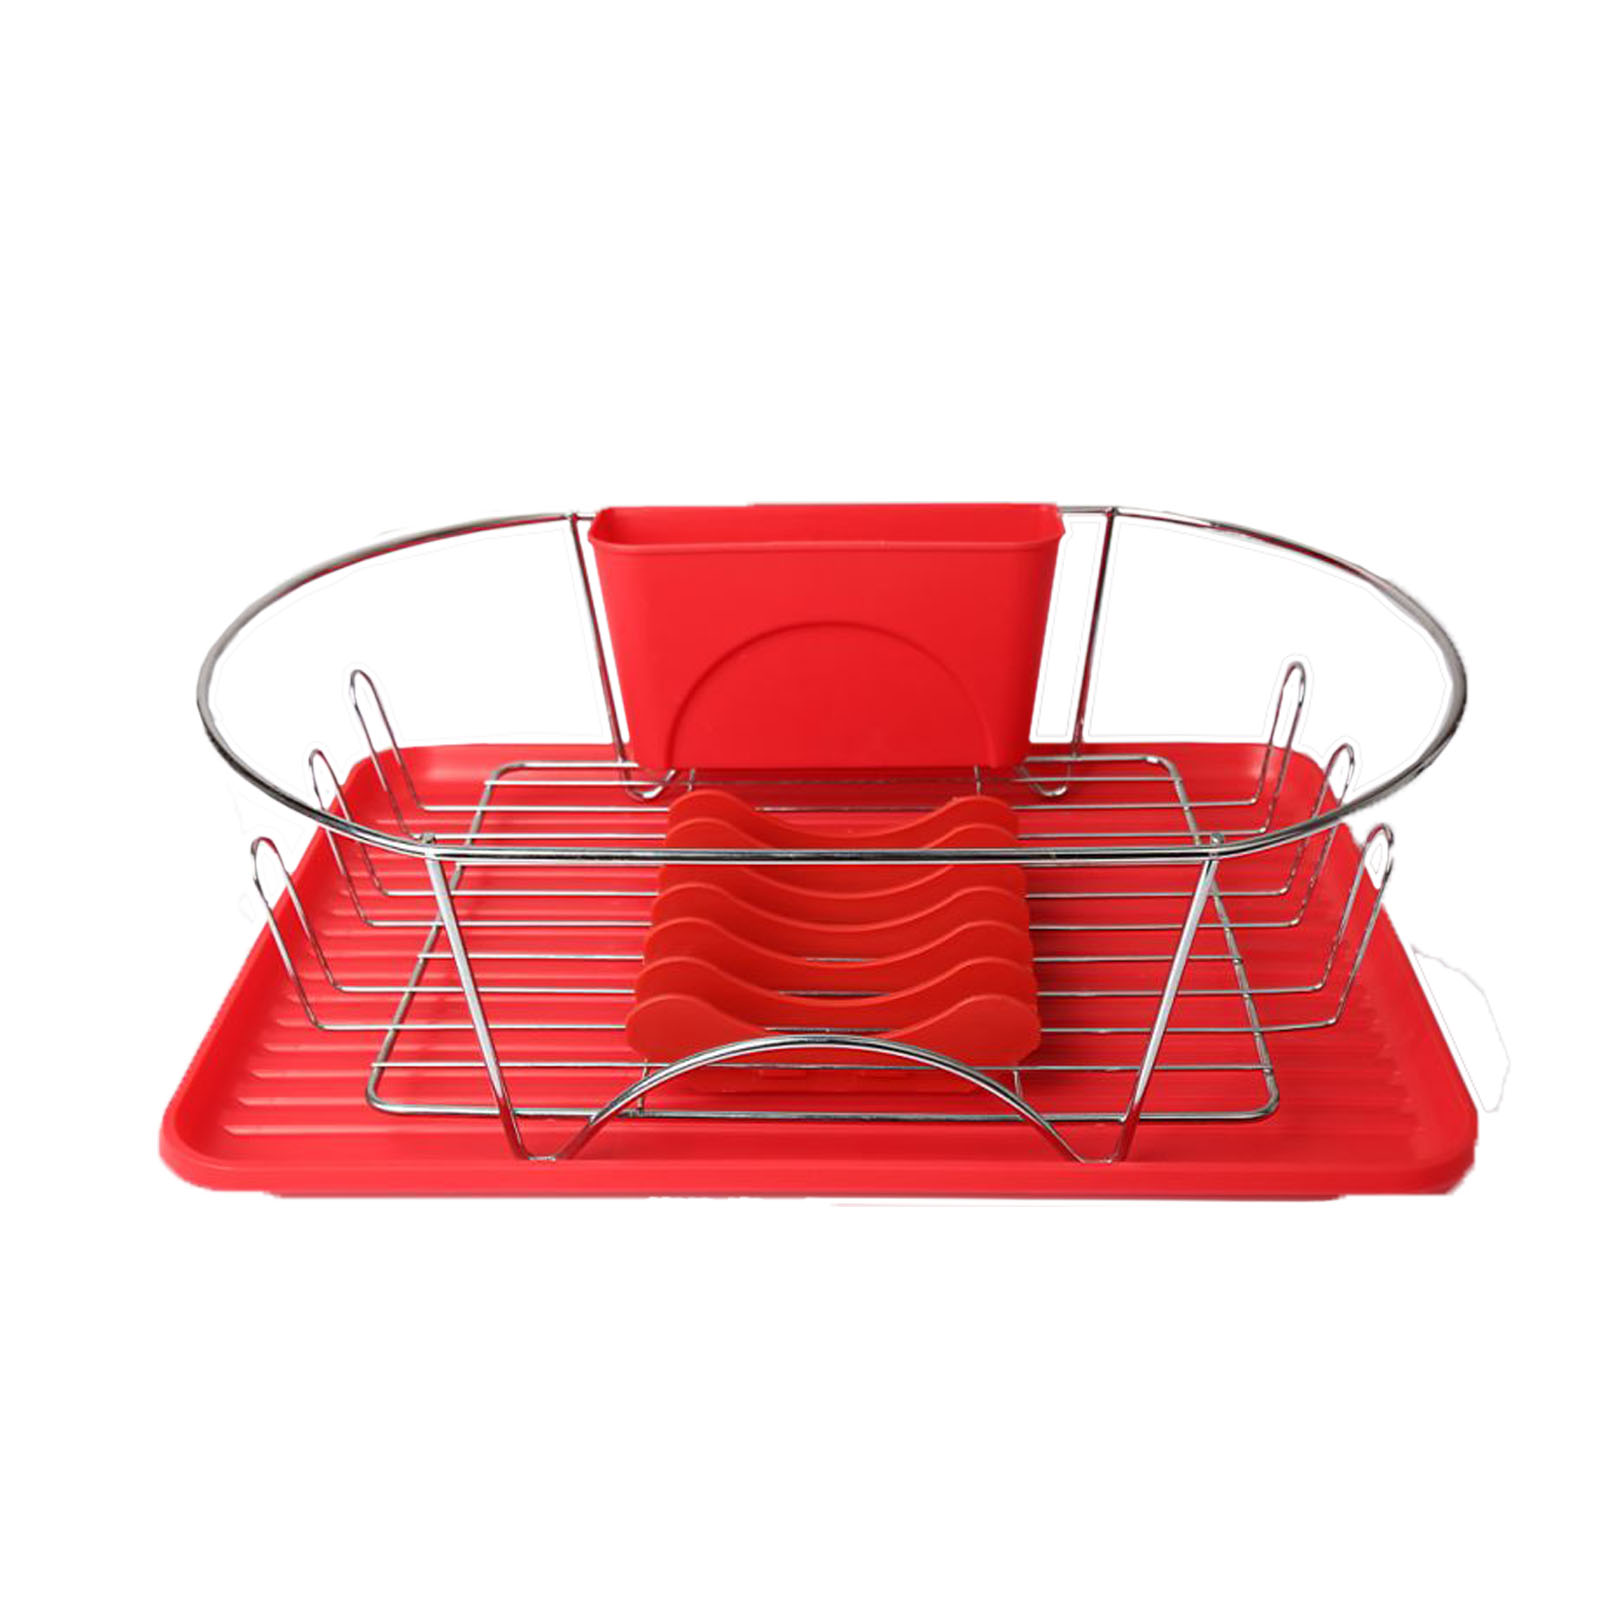 Mega Chef 17 Inch Red and Silver Dish Rack with Detachable Utensil holder and a 6 Attachable Plate Positioner